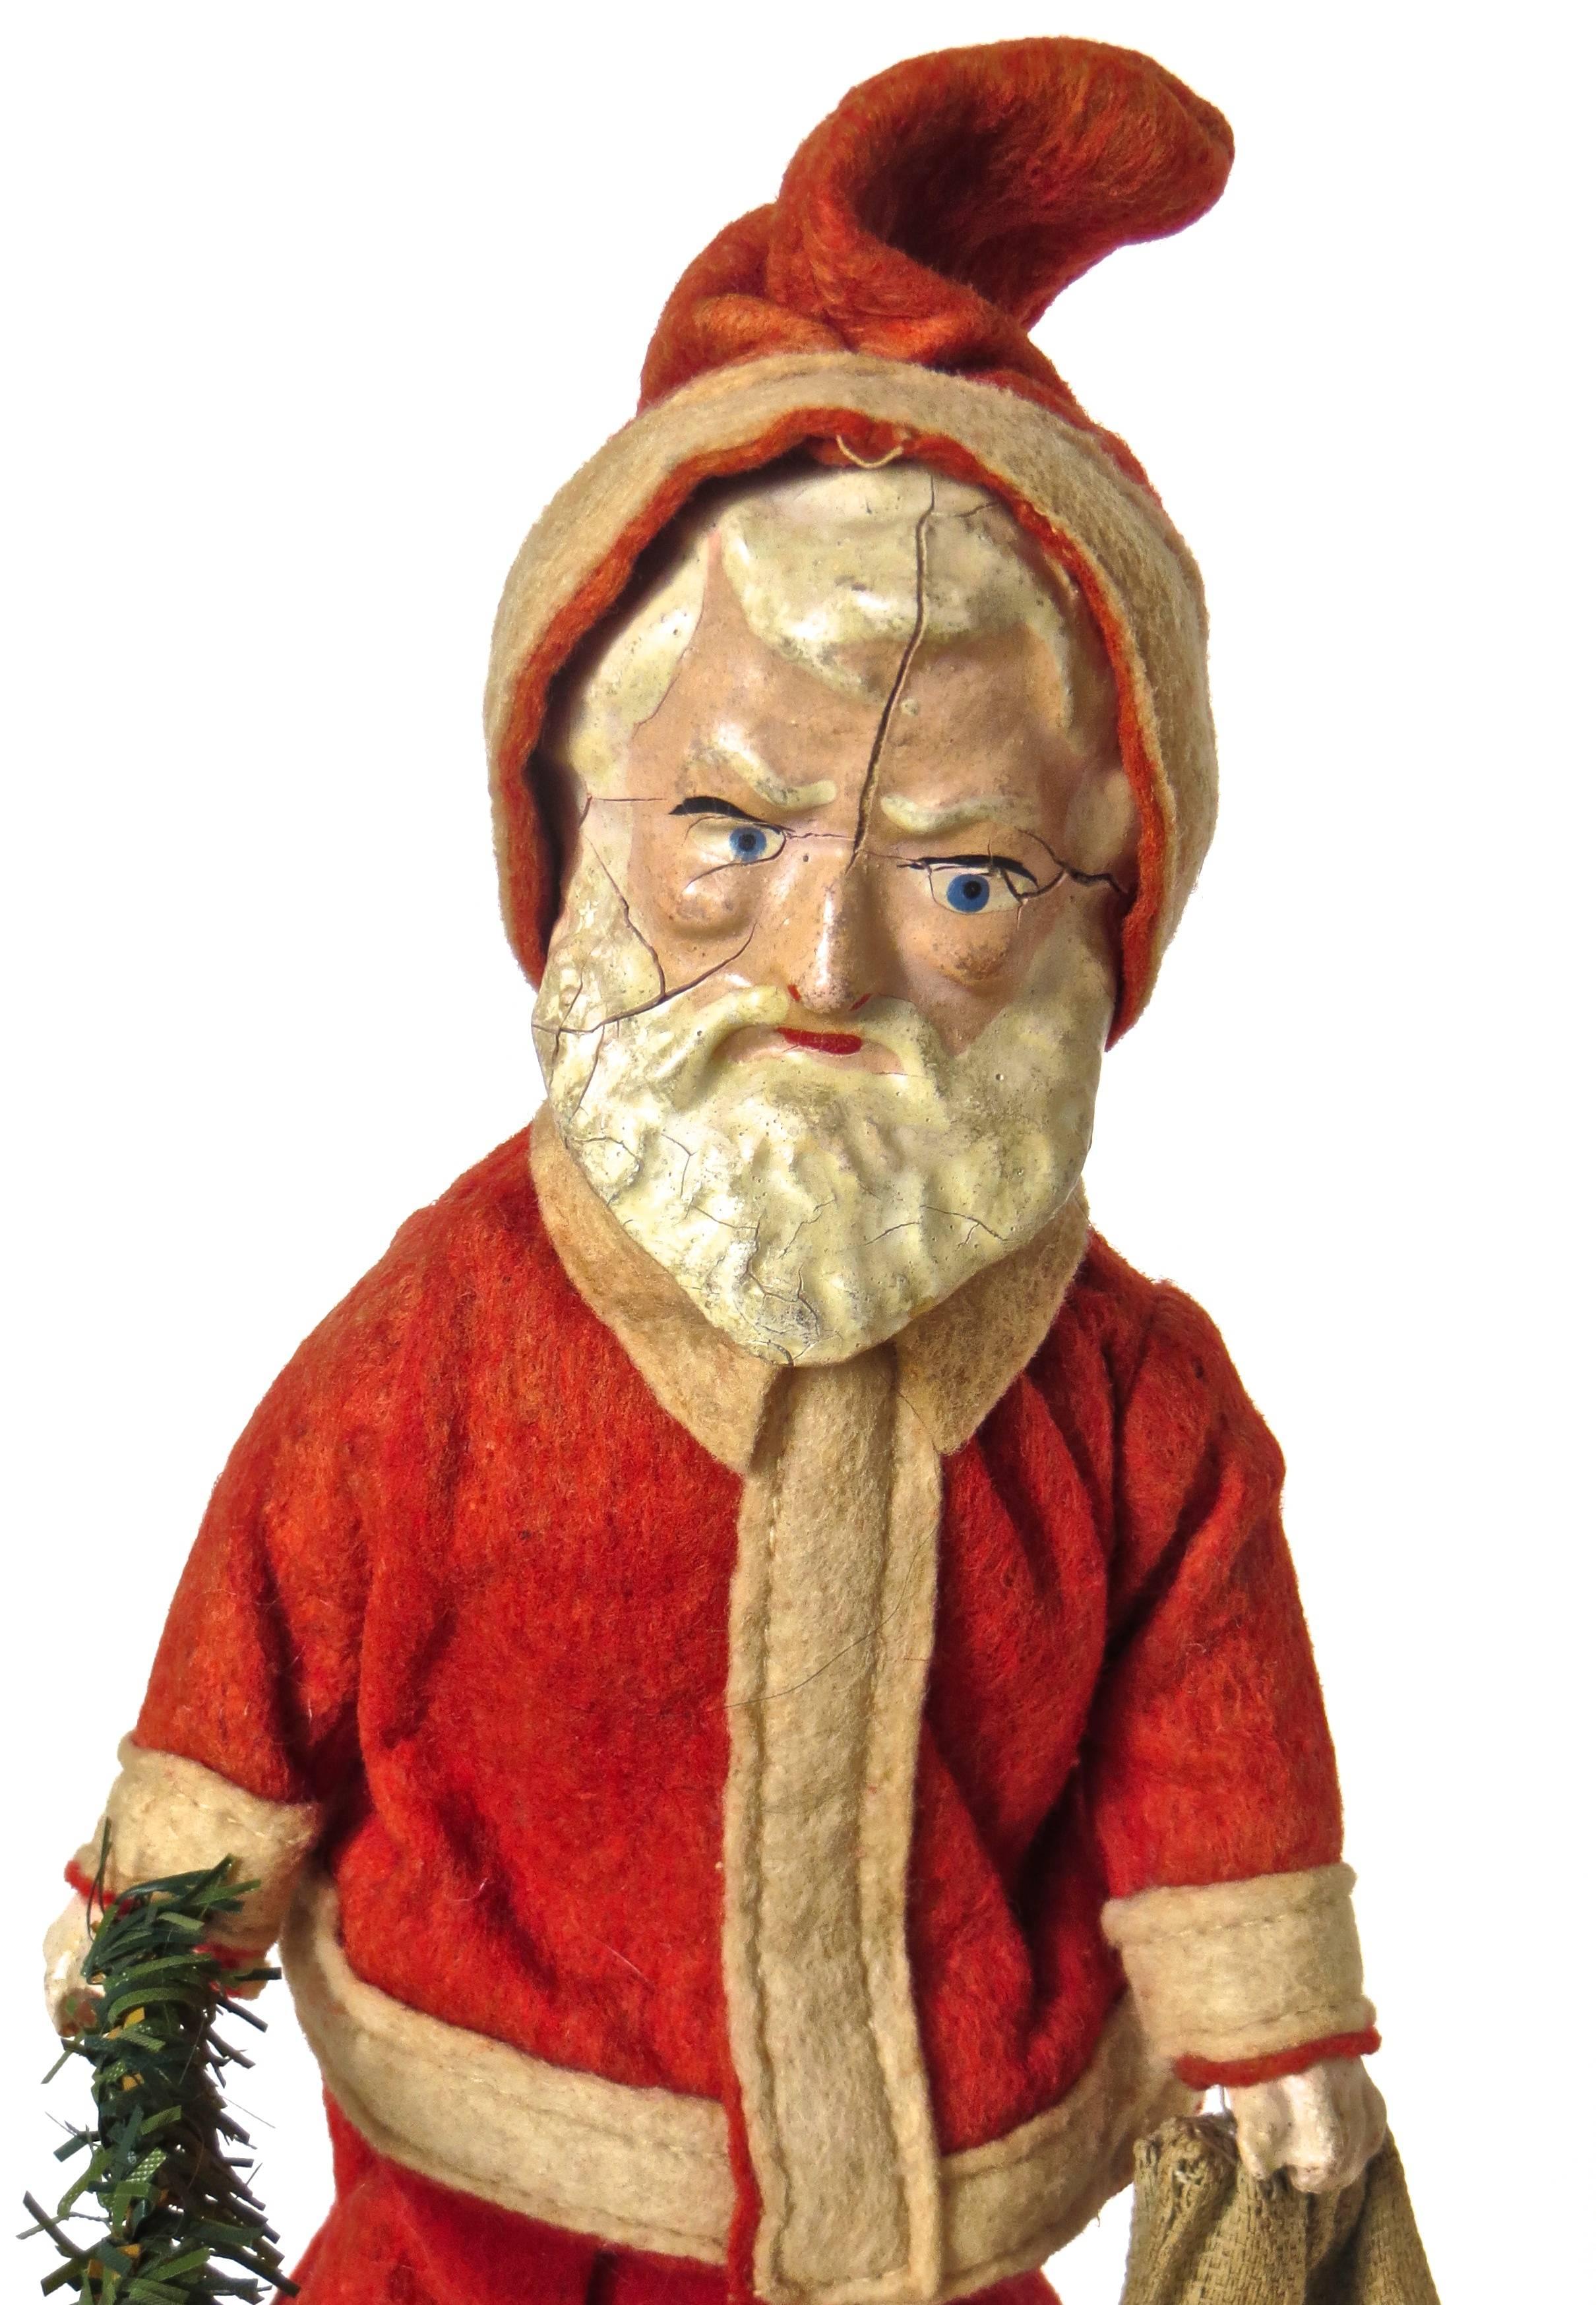 This rare and all original walking Santa Claus clockwork toy was manufactured in about 1890 and is probably of French manufacture, due to the lead feet and hand painted composition head, which was typical of French toy makers in that period.

It